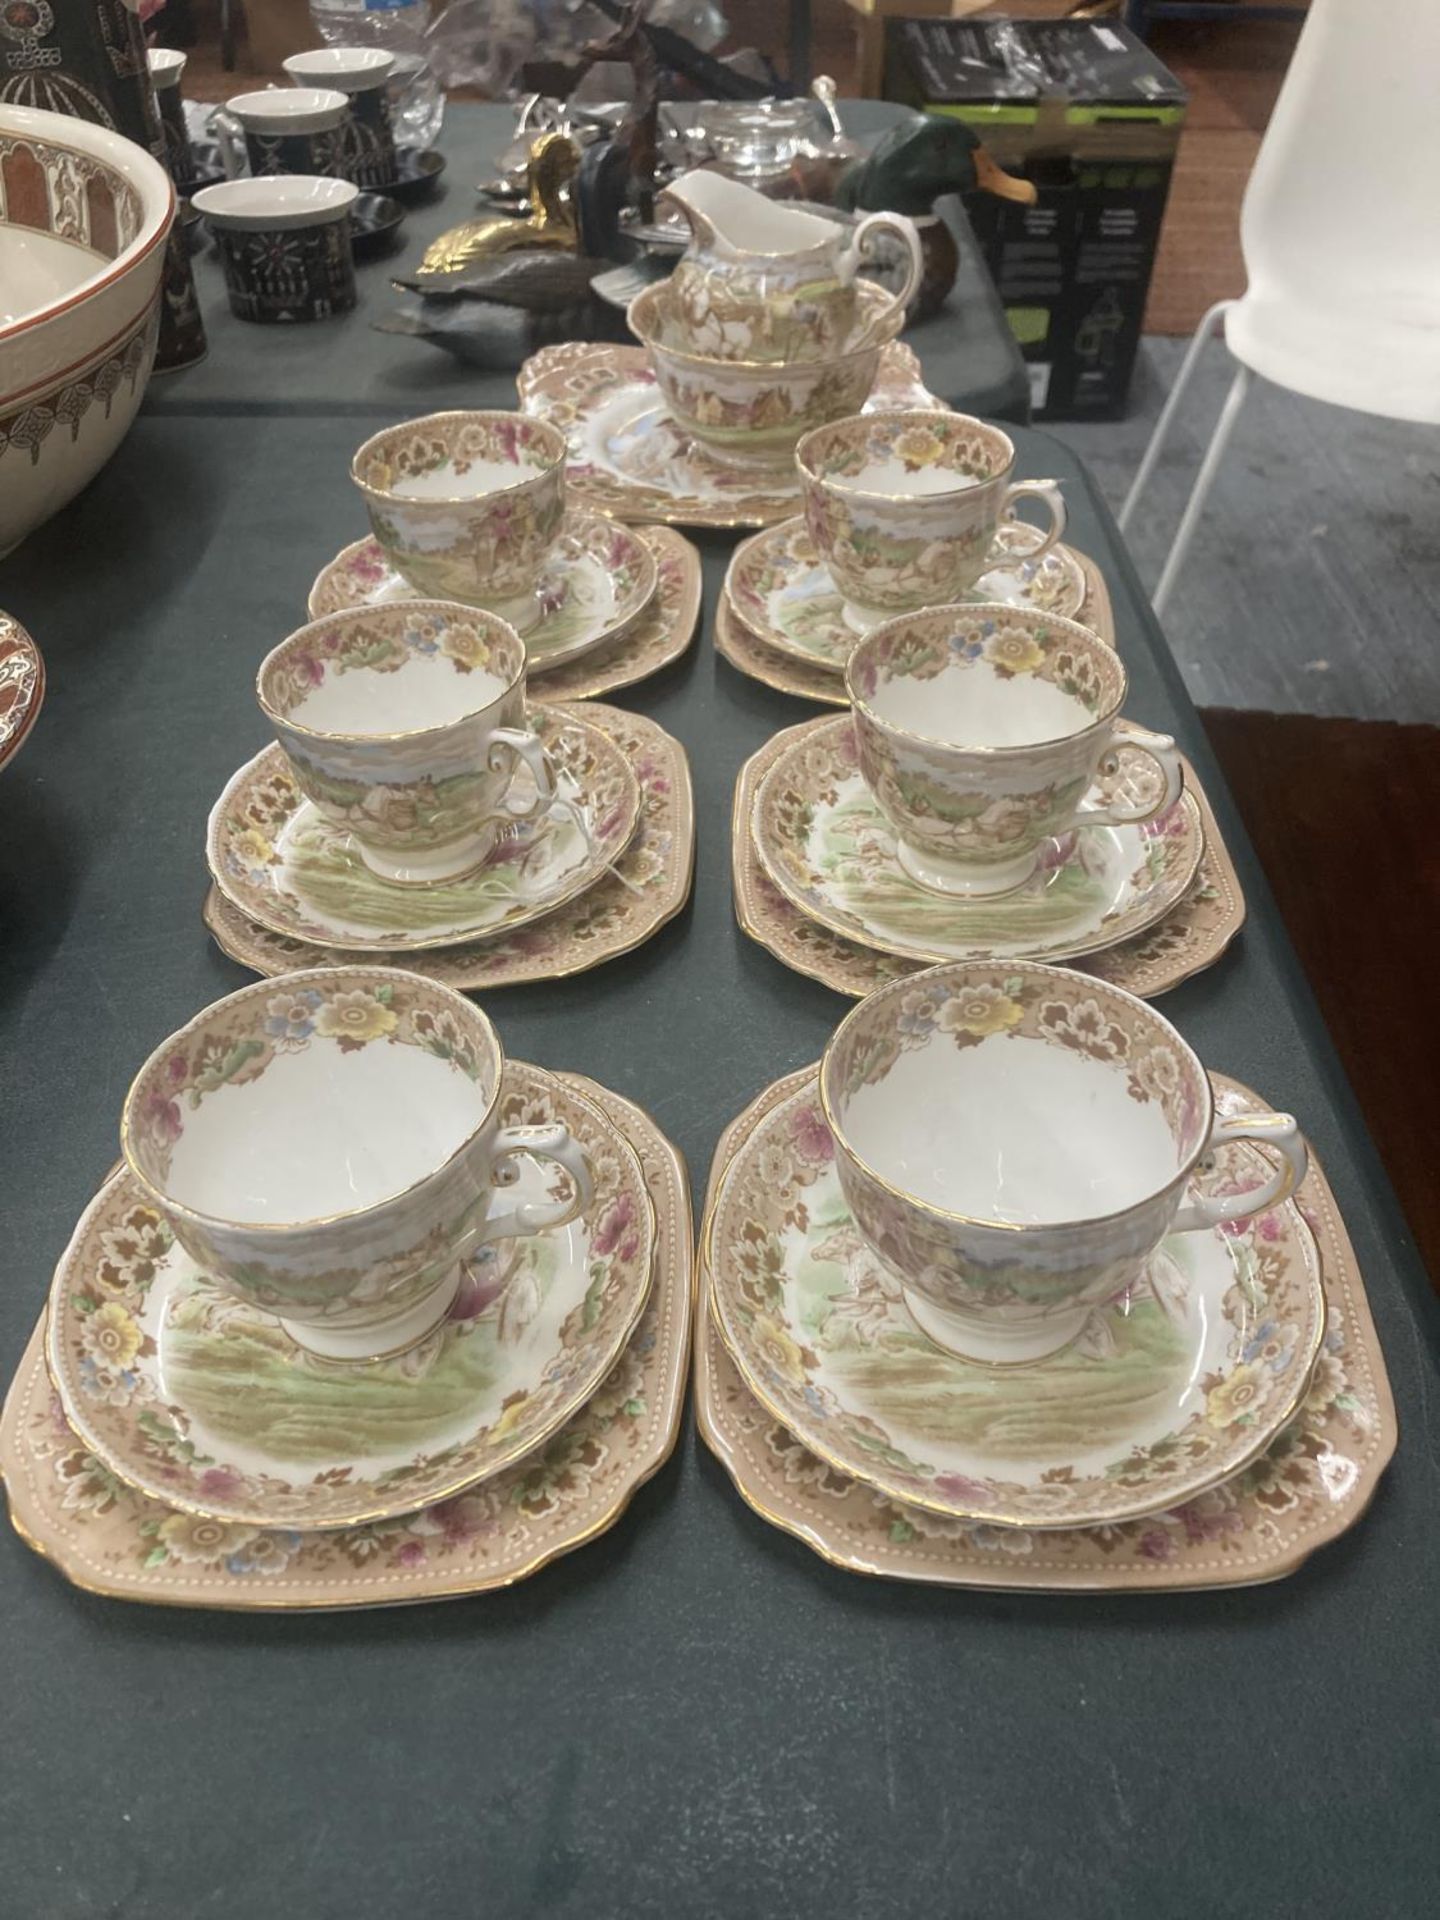 A TUSCAN TEASET WITH A COACHING SCENE DESIGN TO INCLUDE A CAKE PLATE, CREAM JUG, SUGAR BOWL, CUPS,